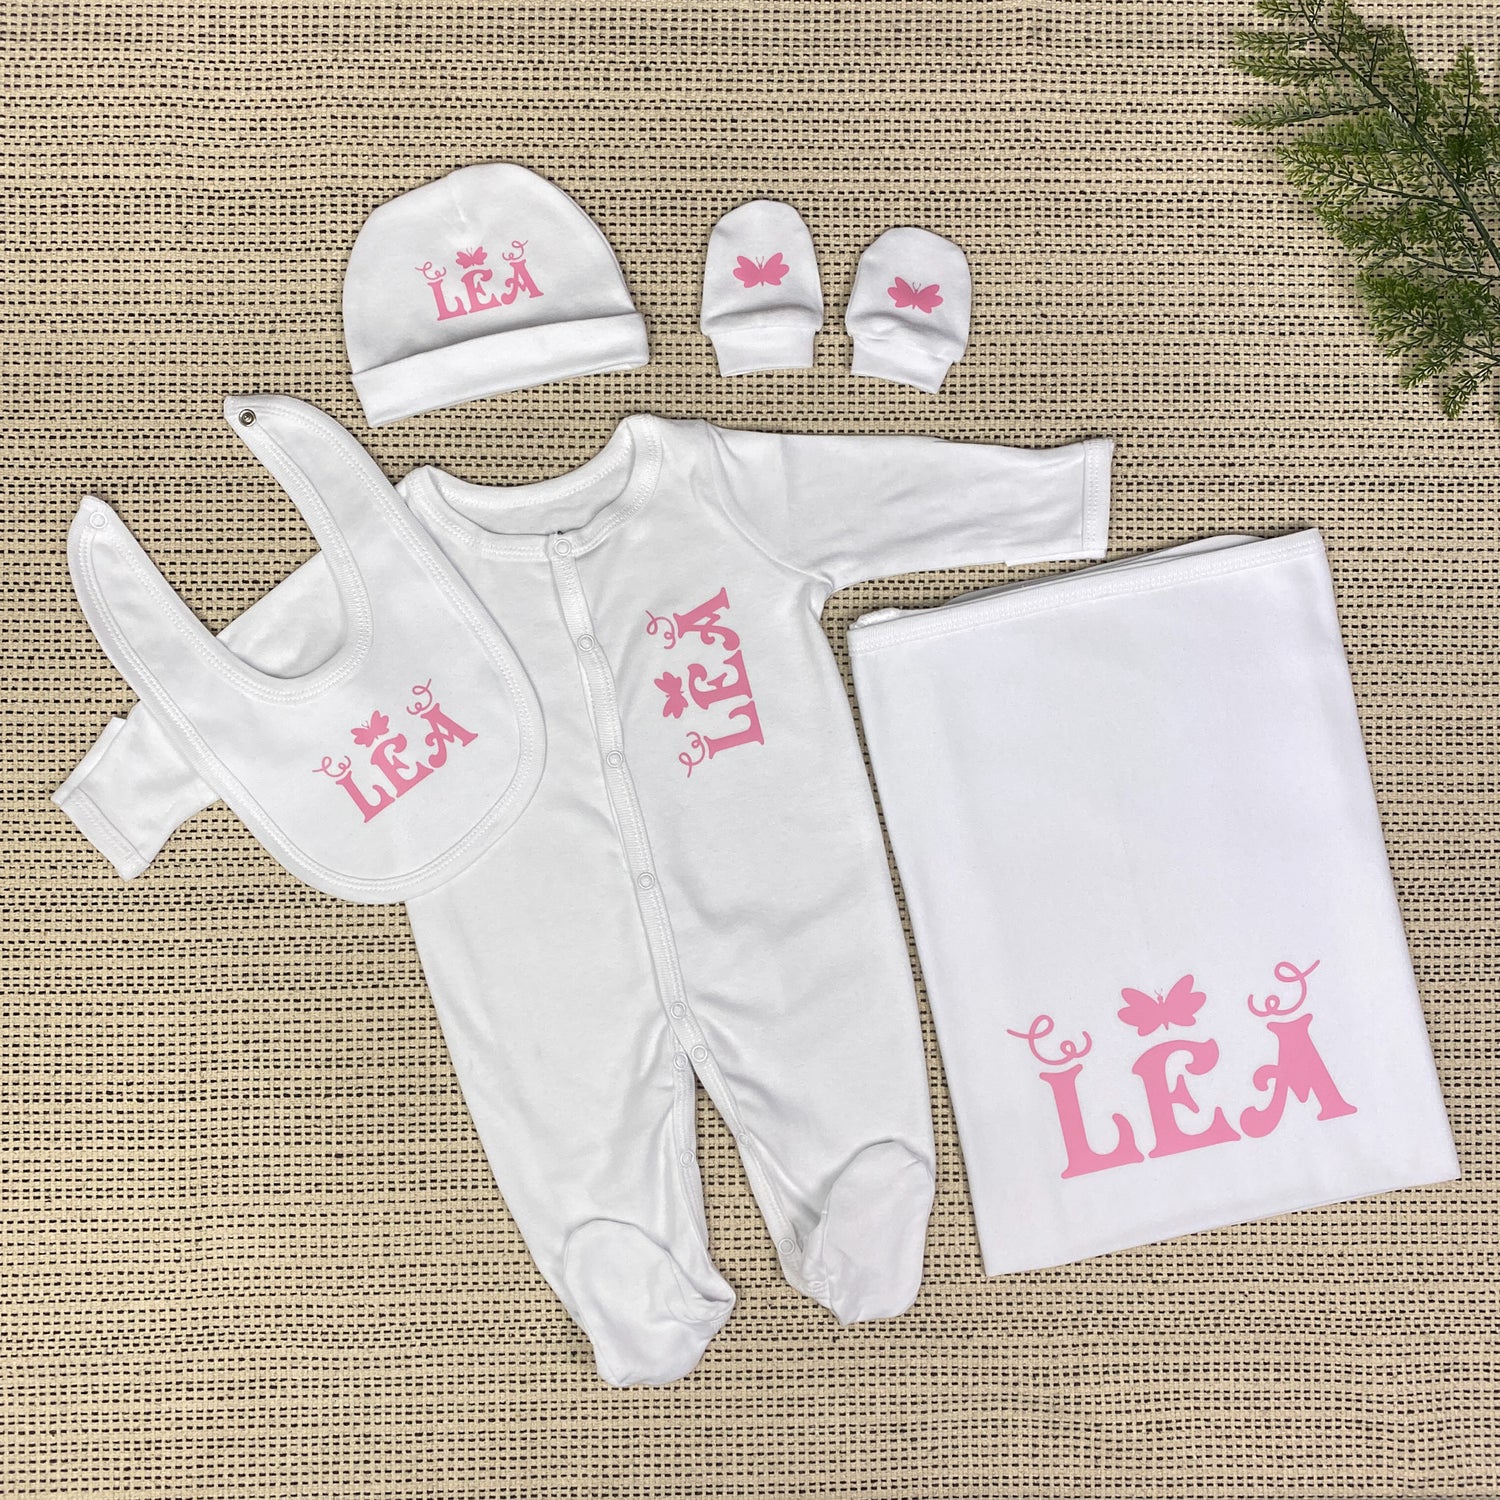 Personalized Clothing Sets